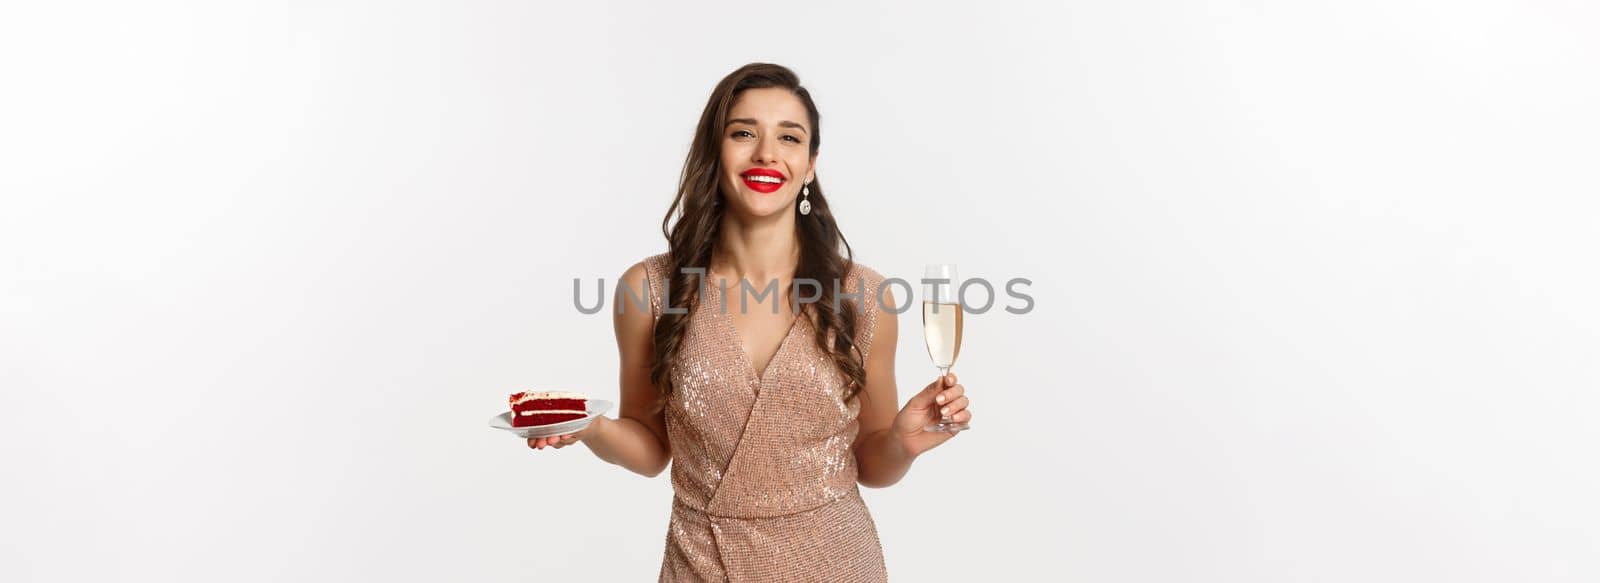 Party and celebration concept. Elegant woman with red lips, glamour dress, drinking champagne and eating cake, standing over white background.